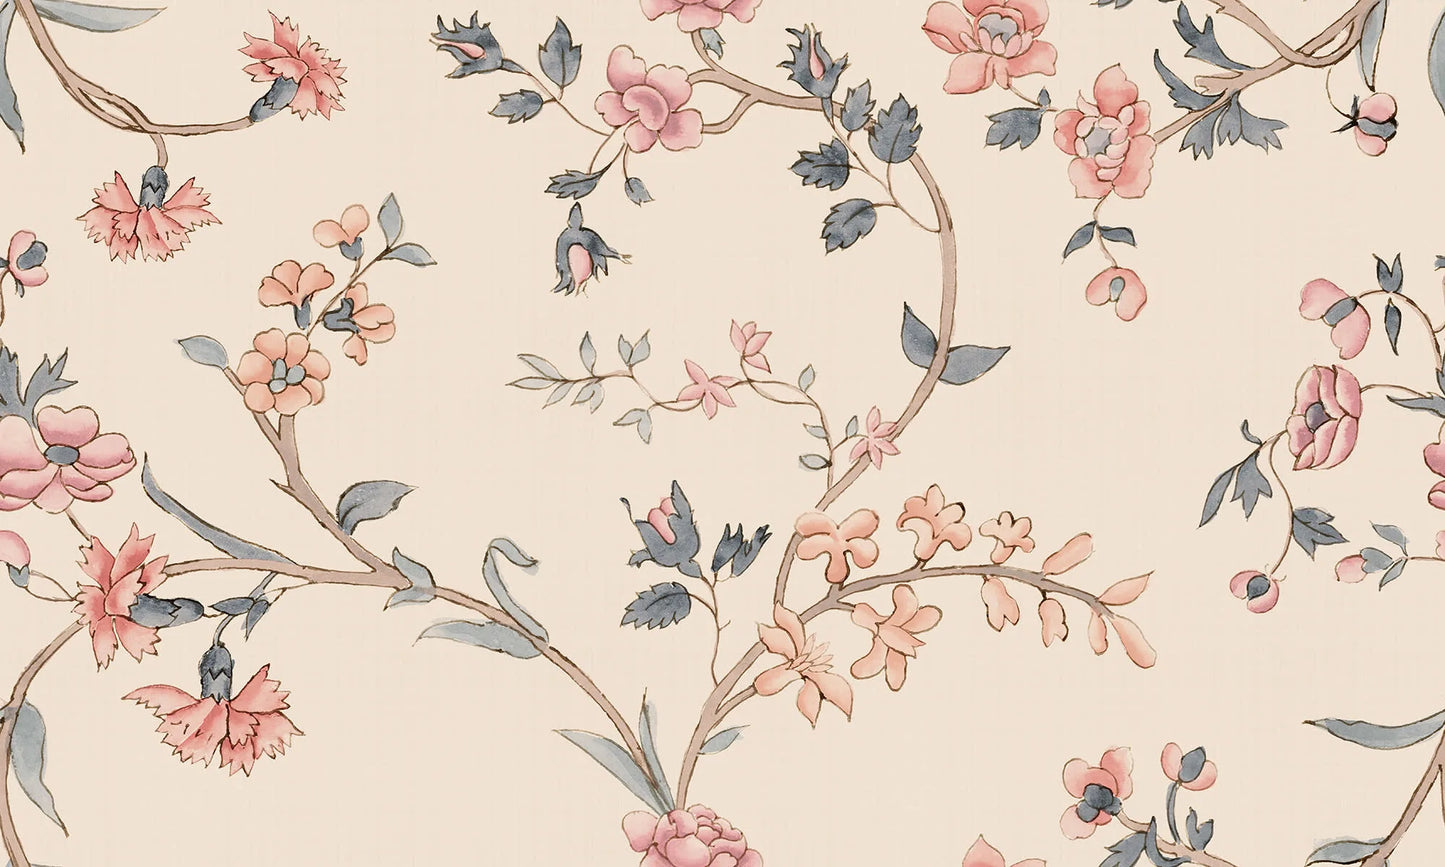 Soft wallpaper in its appearance and with a vintage feel. Clara, Pastel, has flowers in pale pastel blues, pinks, and blue on a beige background.